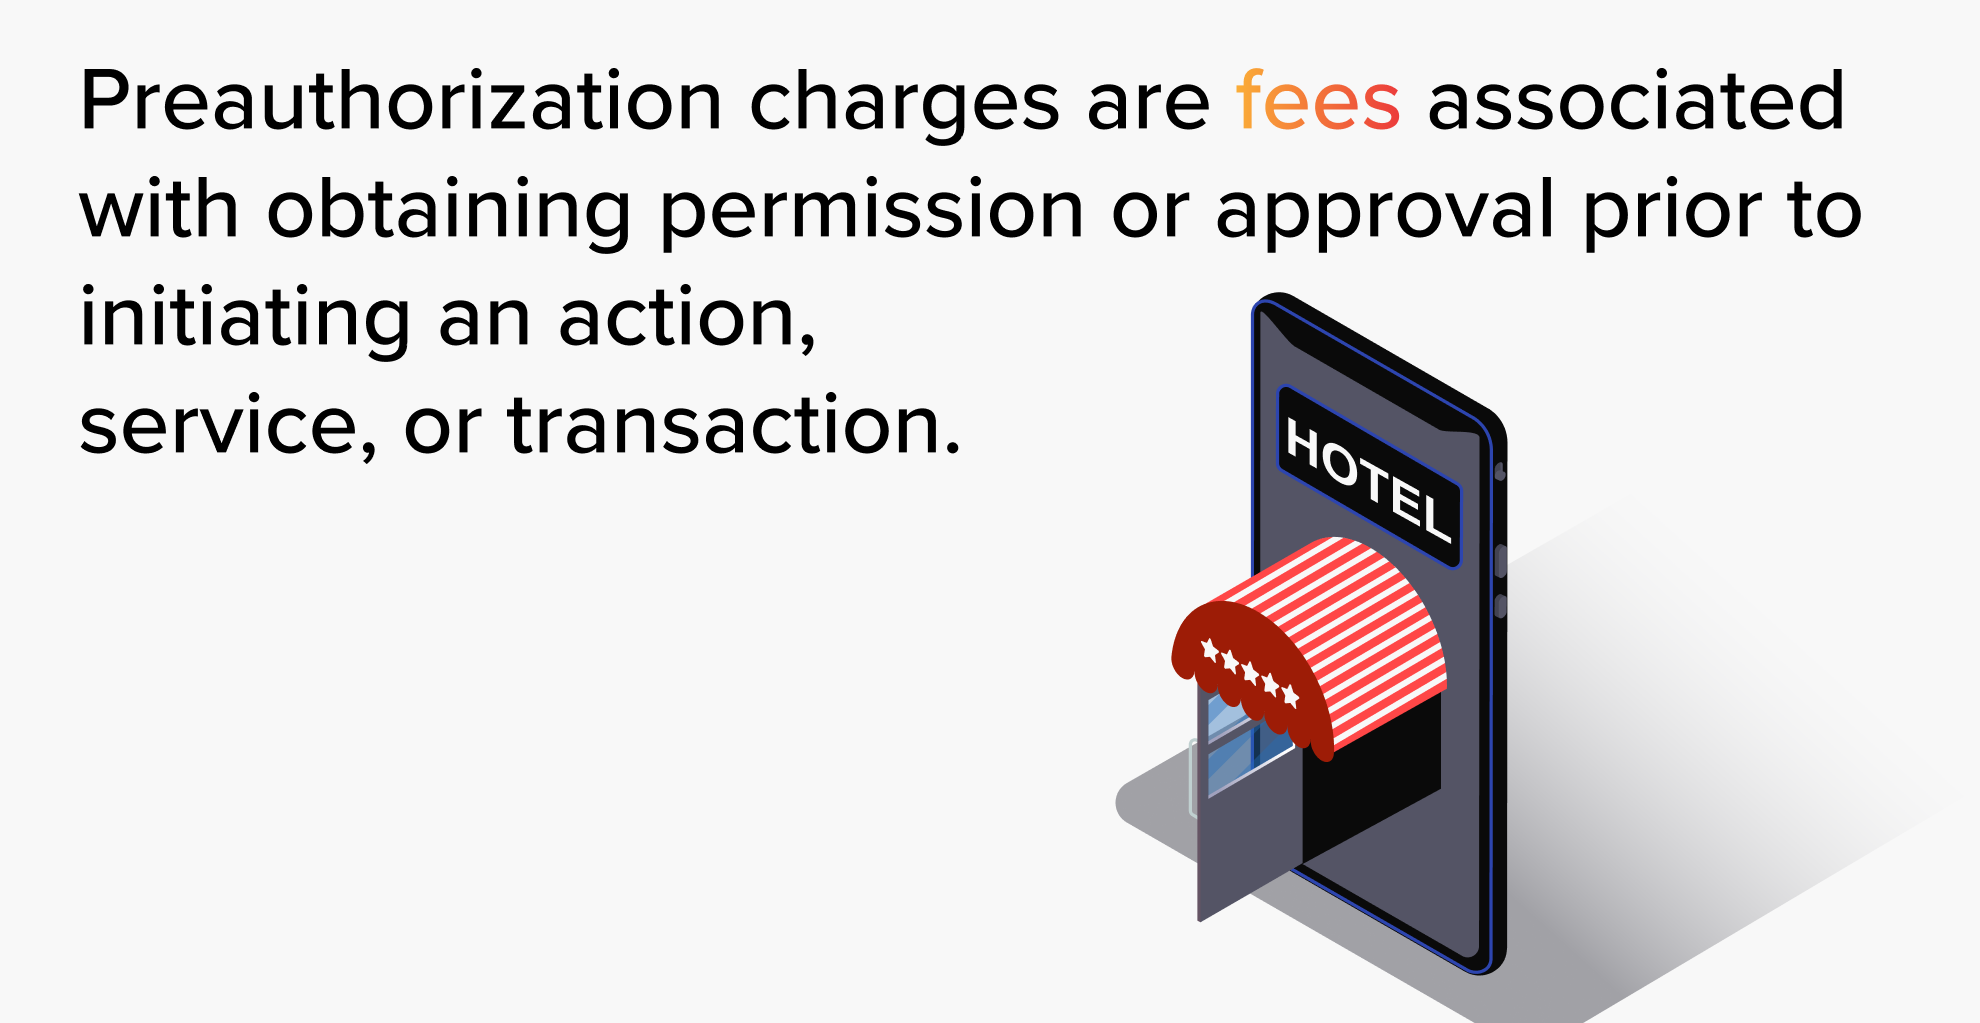 What is a pre authorization charge